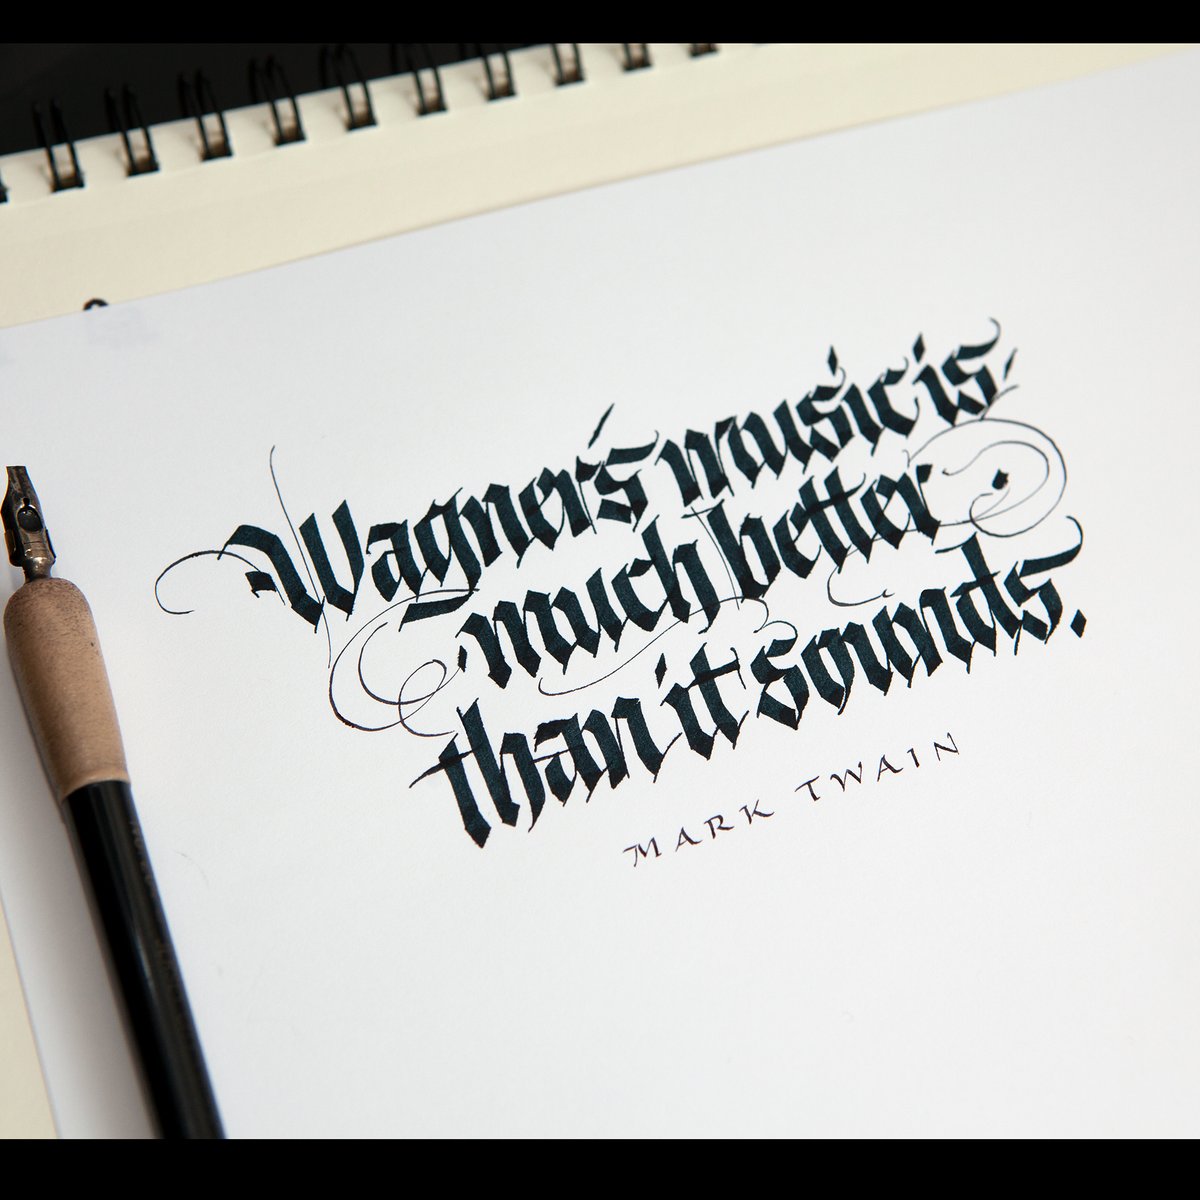 trending topic: Jokes about Wagner.
#calligraphylettering #gothicstyle #parallelpen